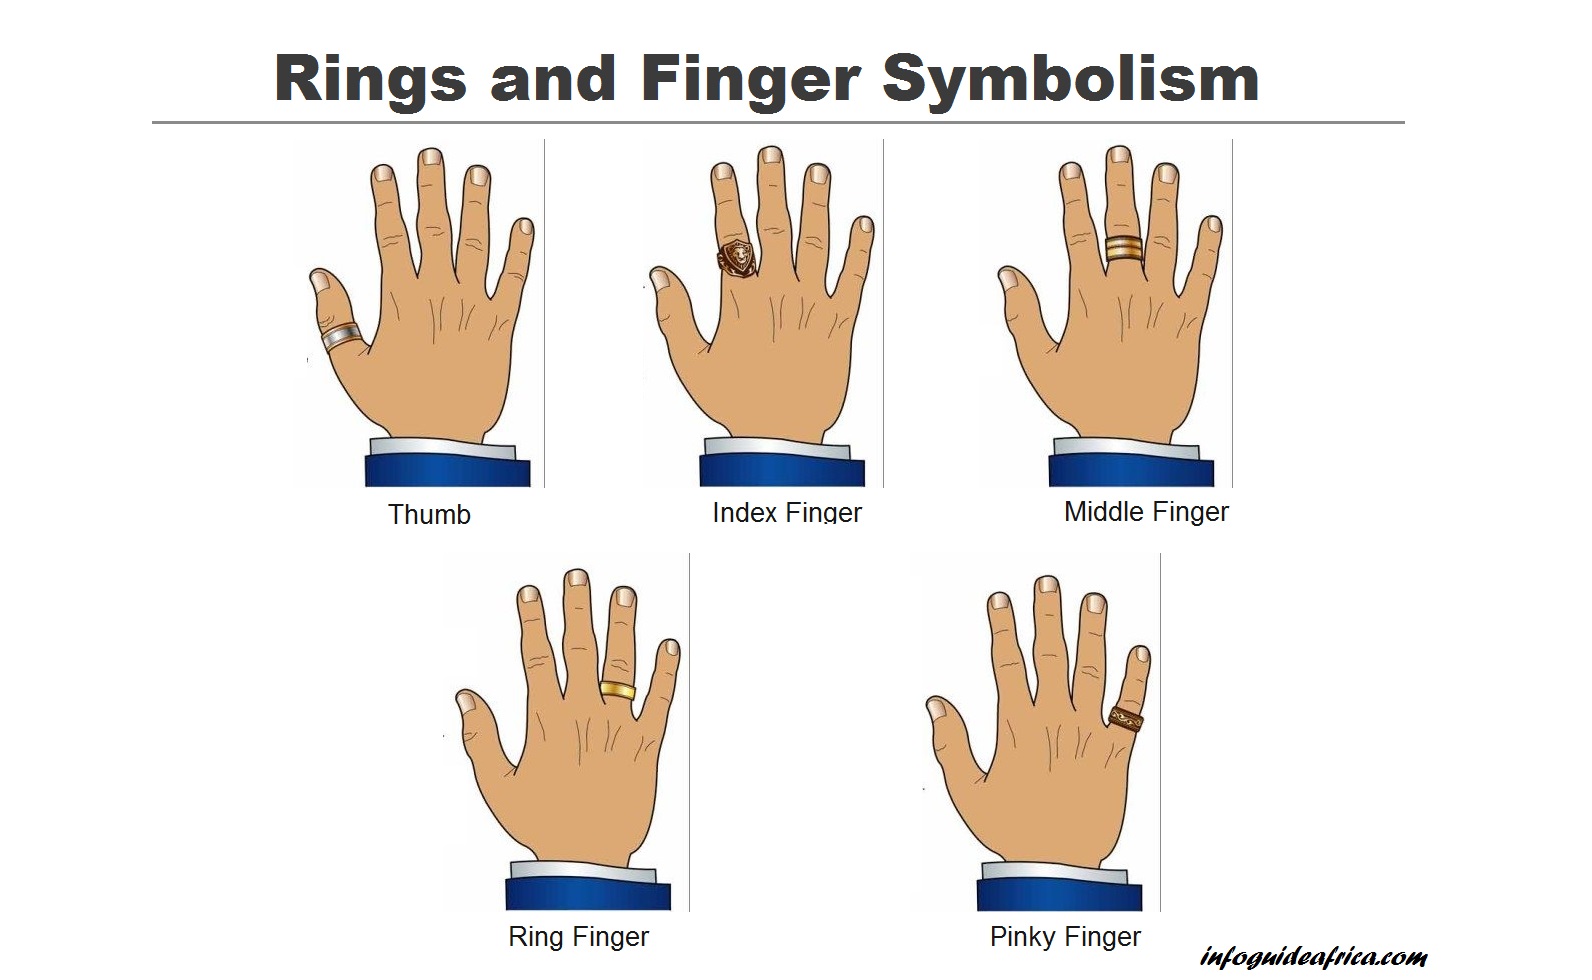 Why Do Some People Have Different Nail Colors on Their Ring Finger? - wide 1